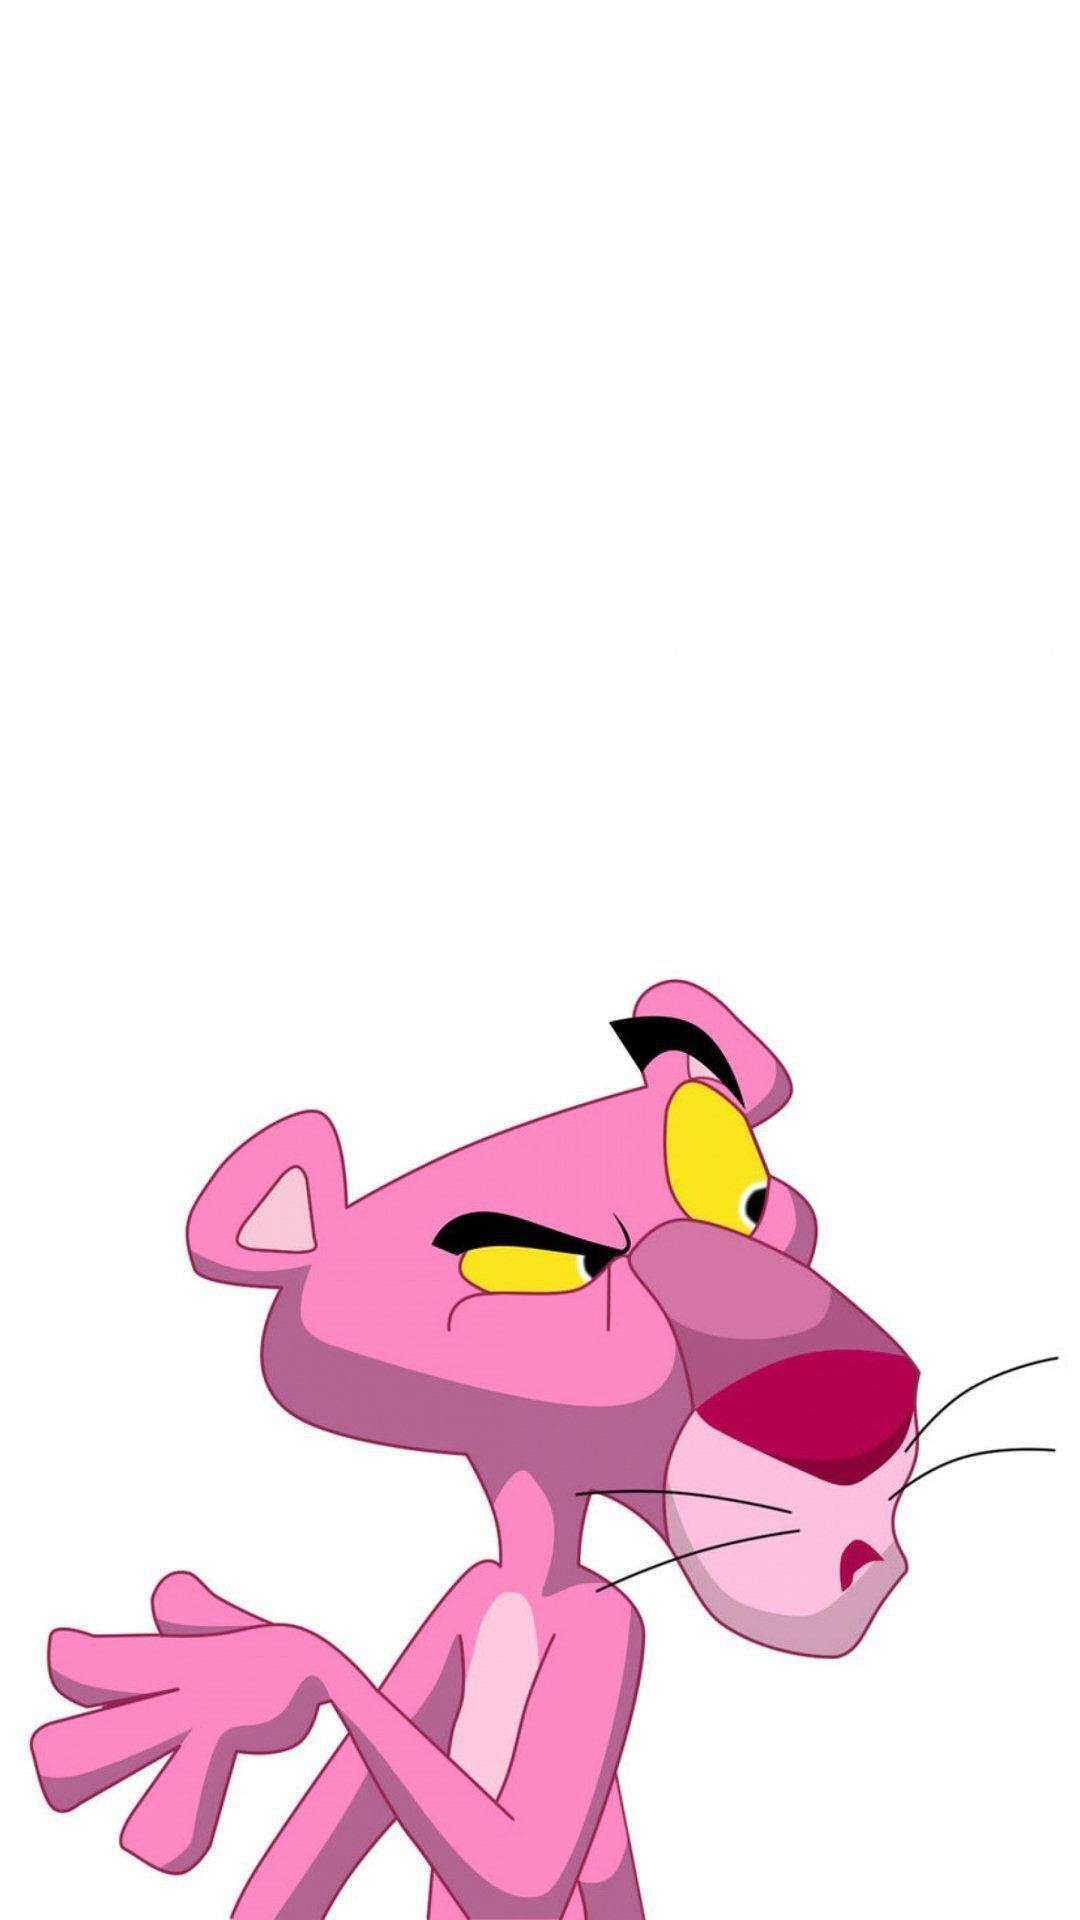 Pink Panther iPhone 6 Wallpaper with high-resolution 1080x1920 pixel. You can use this wallpaper for your iPhone 5, 6, 7, 8, X, XS, XR backgrounds, Mobile Screensaver, or iPad Lock Screen - Pink Panther